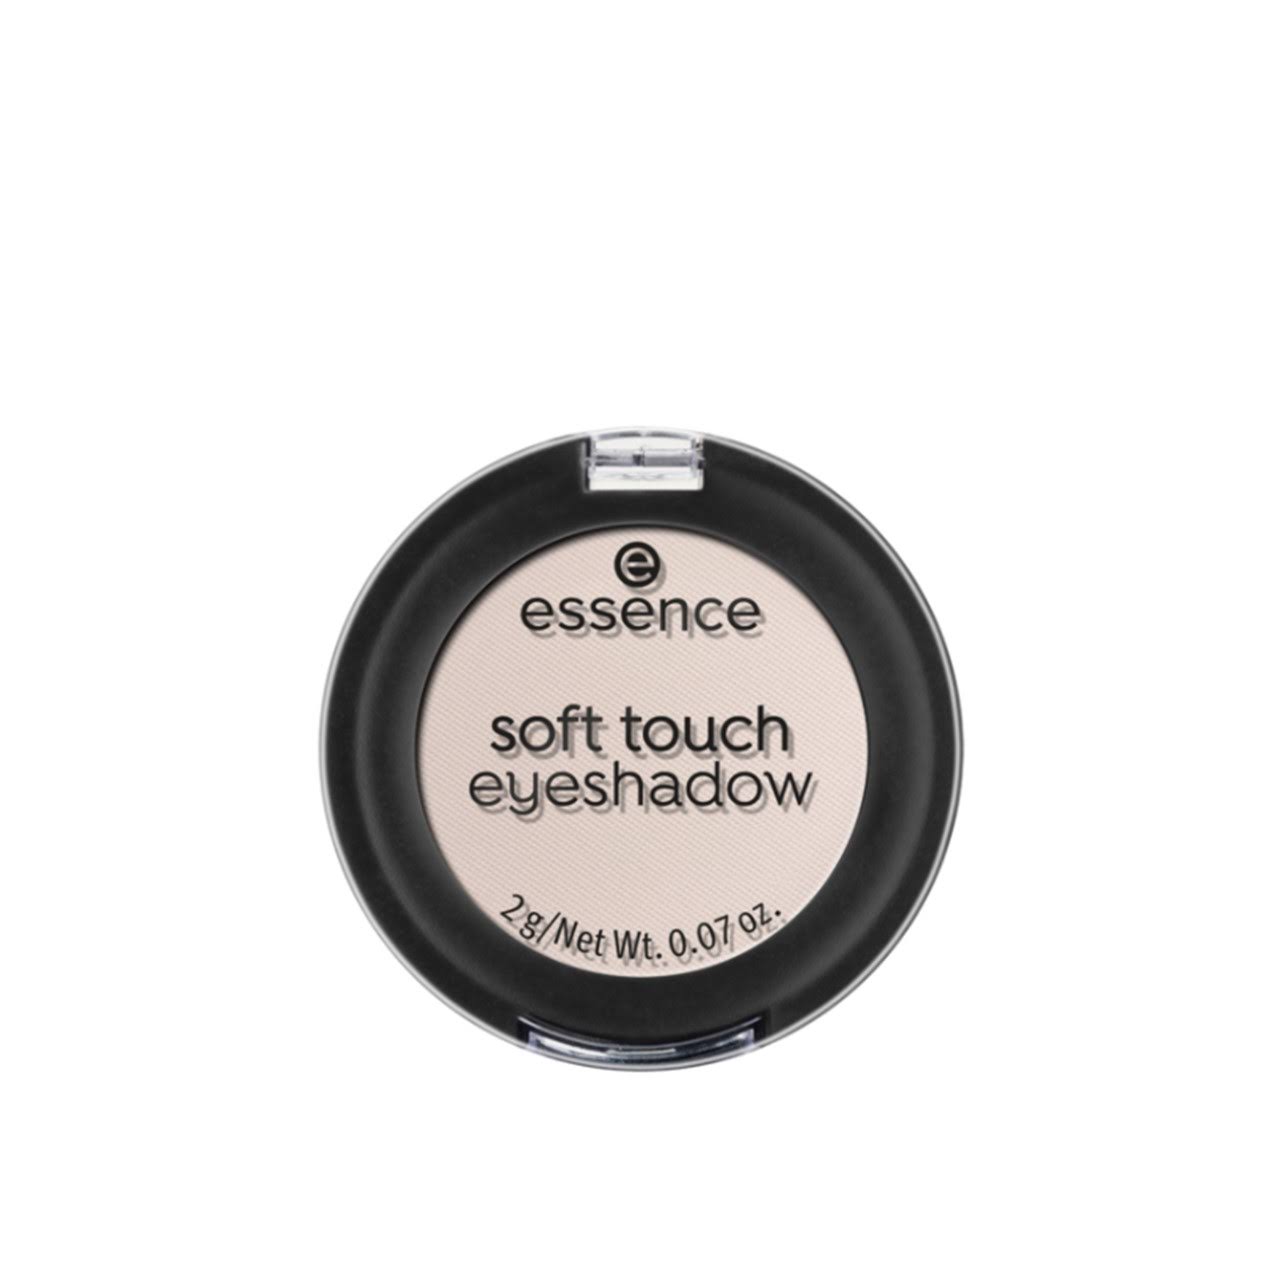 Essence Soft Touch Eyeshadow - 01 The One